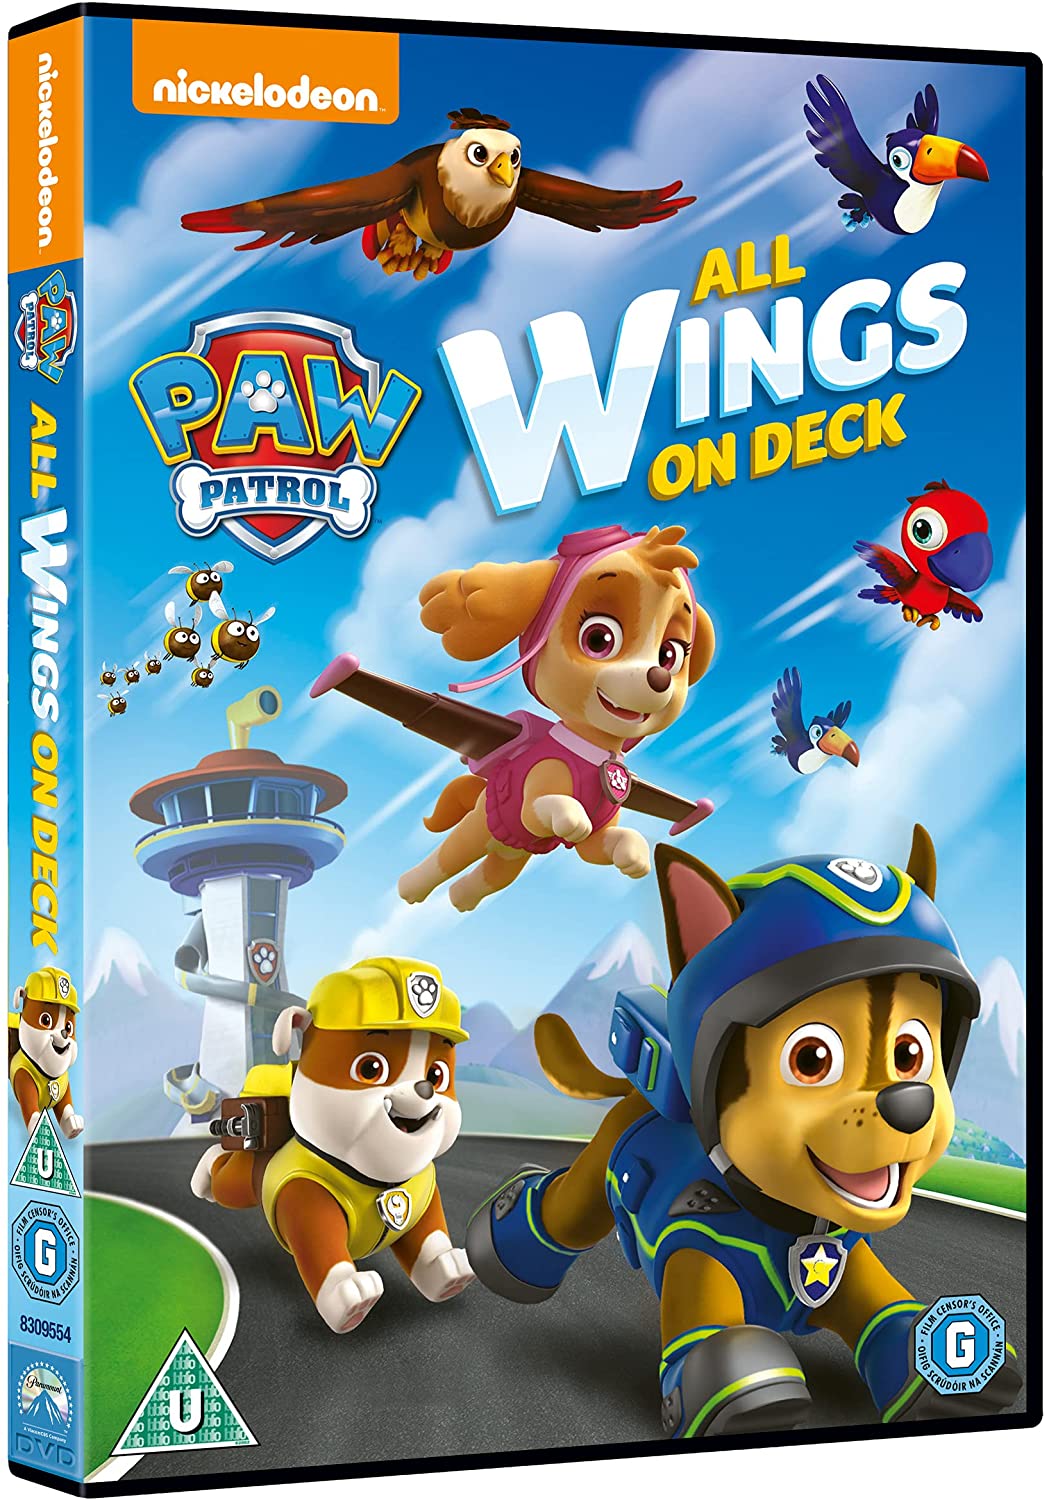 Paw Patrol: All Wings On Deck - Animation [DVD]